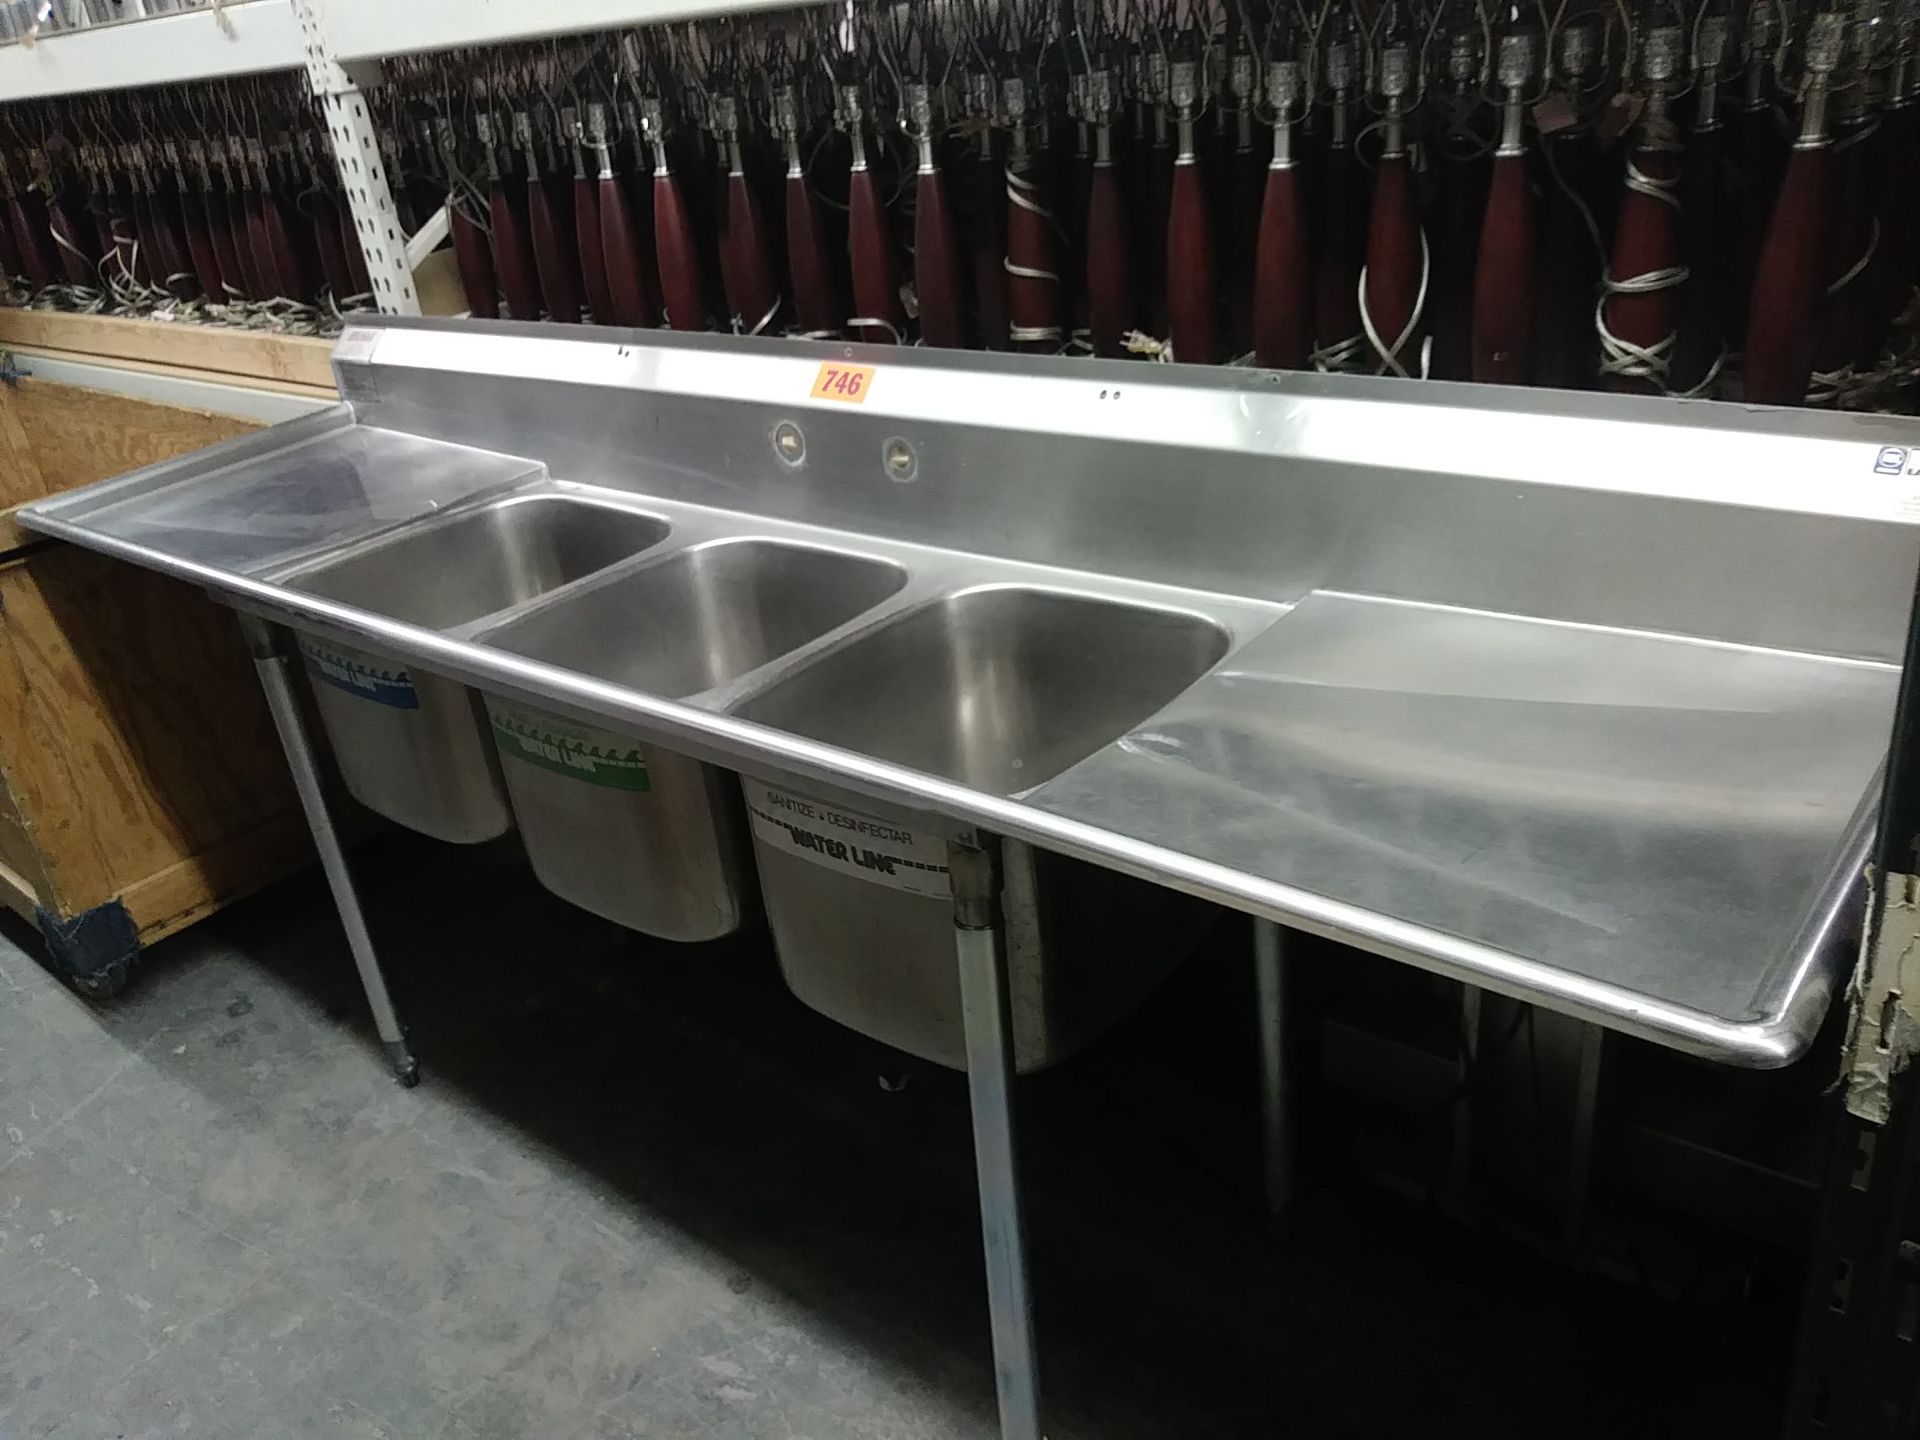 STAINLESS STEEL 3 COMPARTMENT SINK 102" LENGTH X 25" DEPTH X 37" COUNTER HEIGHT